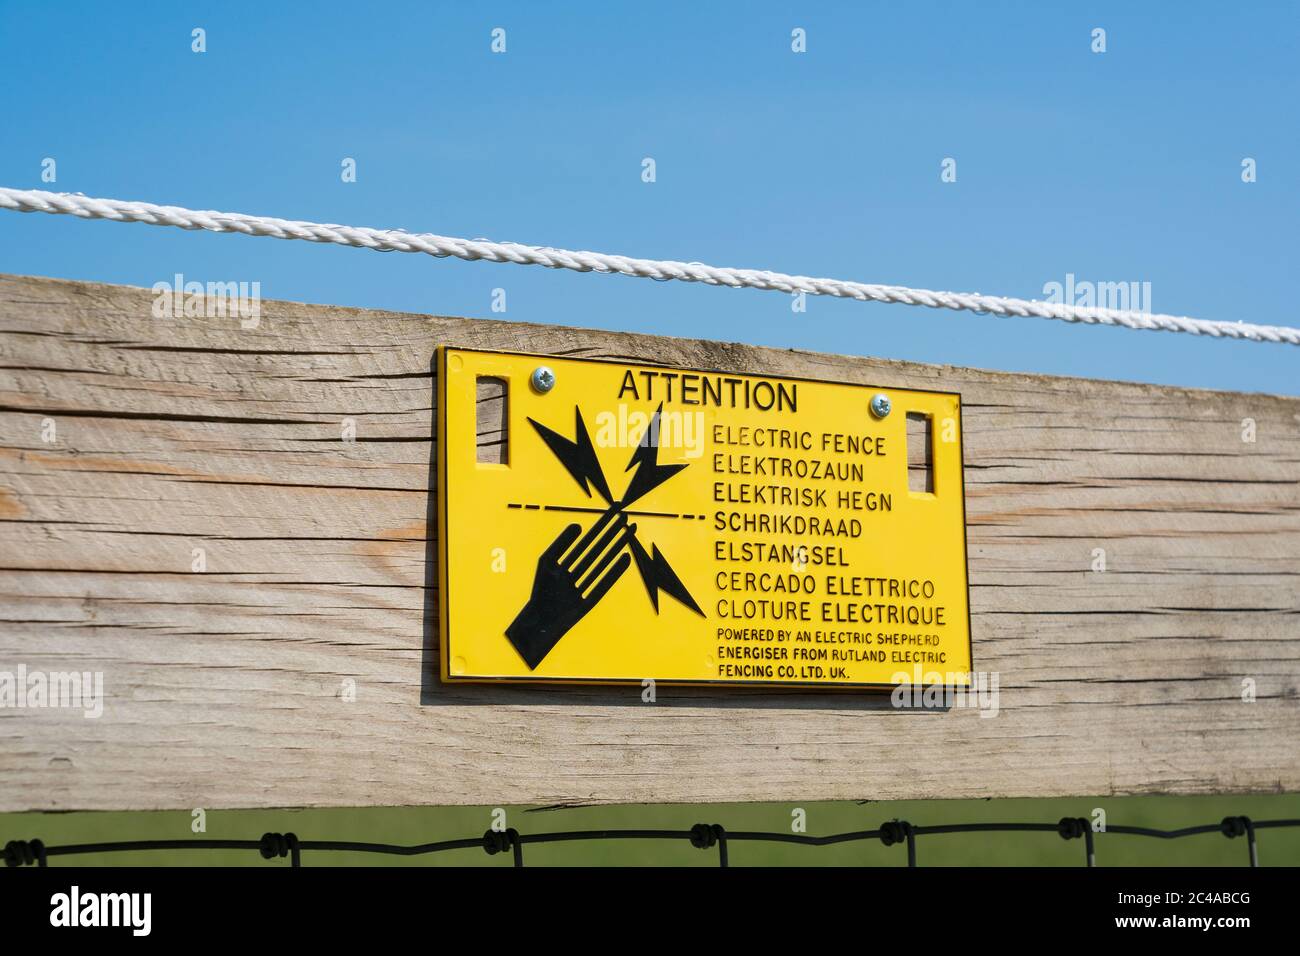 Sign on wooden fence warning people of electric fence. Green Tye, Much Hadham, Hertfordshire. UK Stock Photo